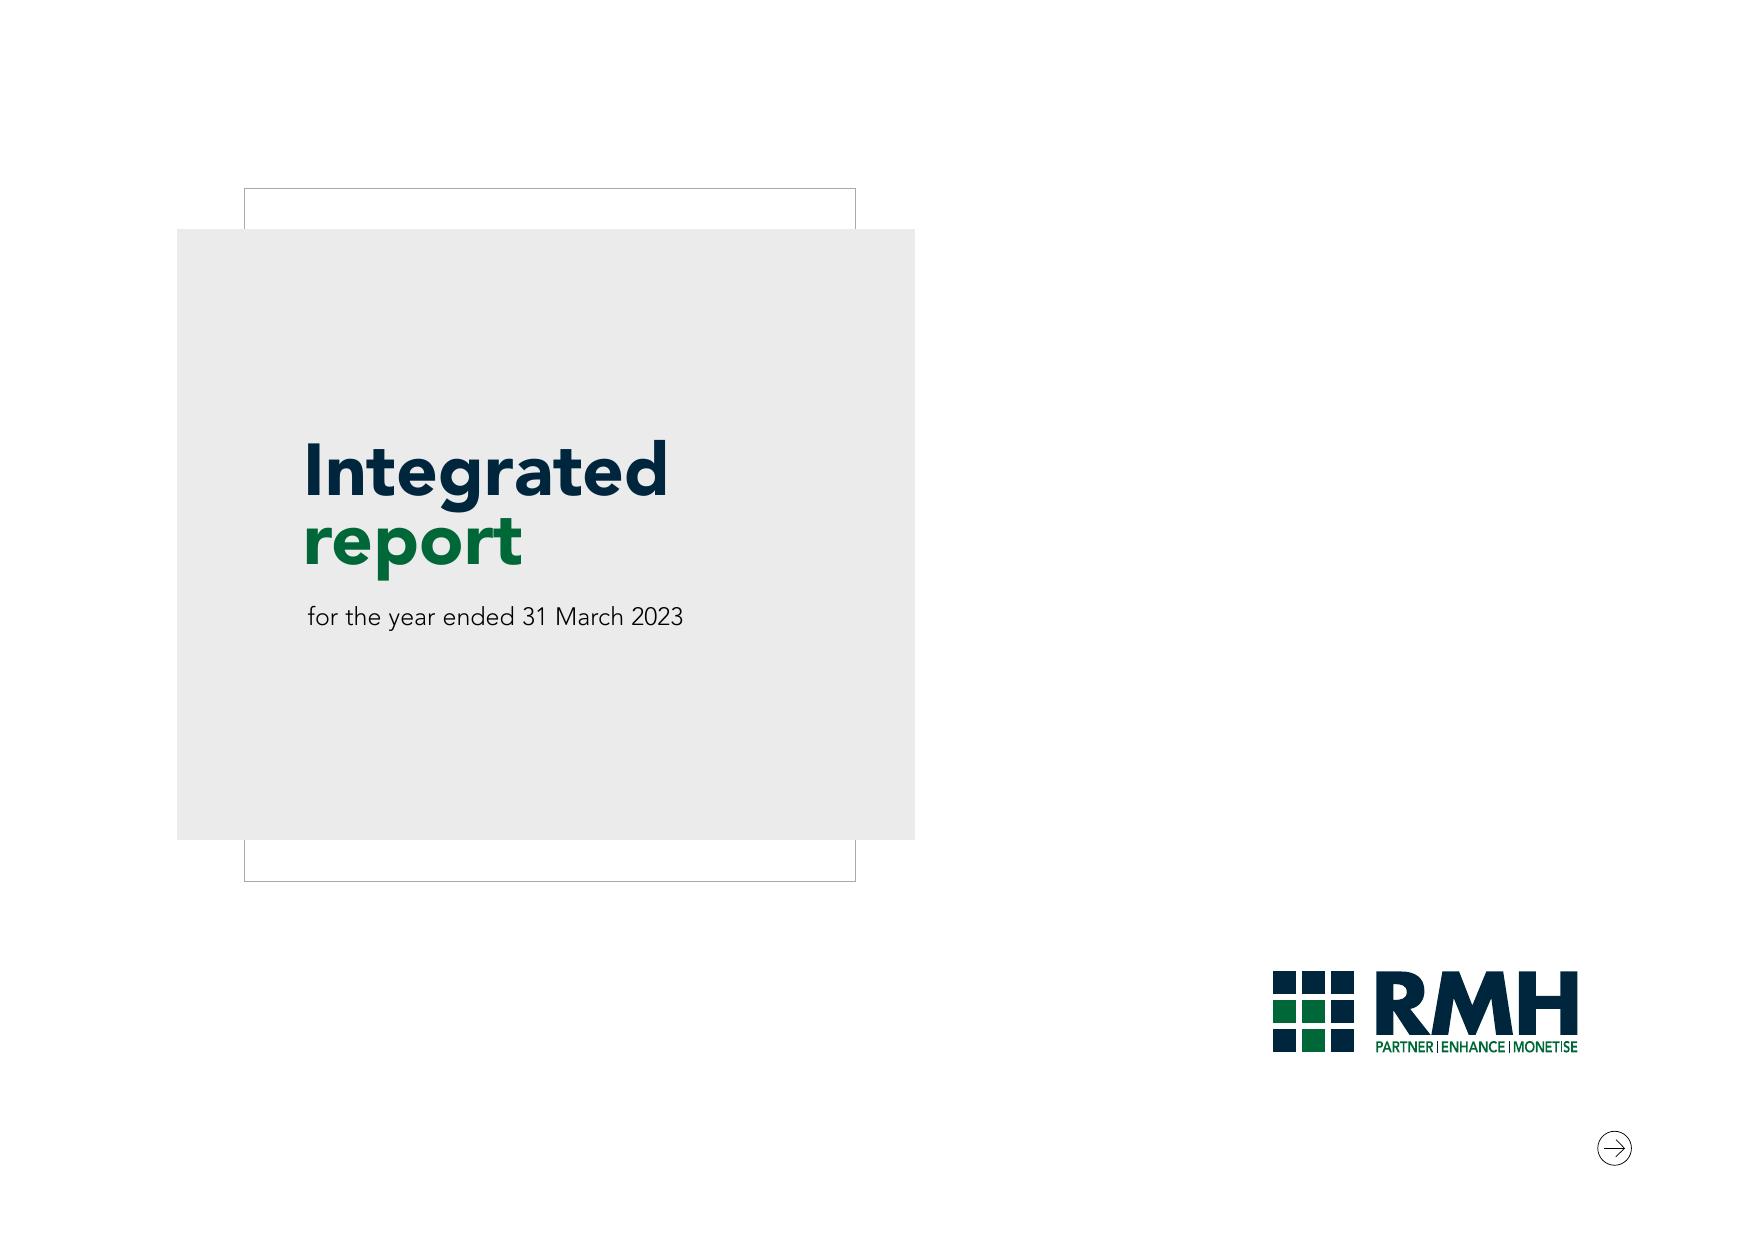 RMH 2023 Annual Report